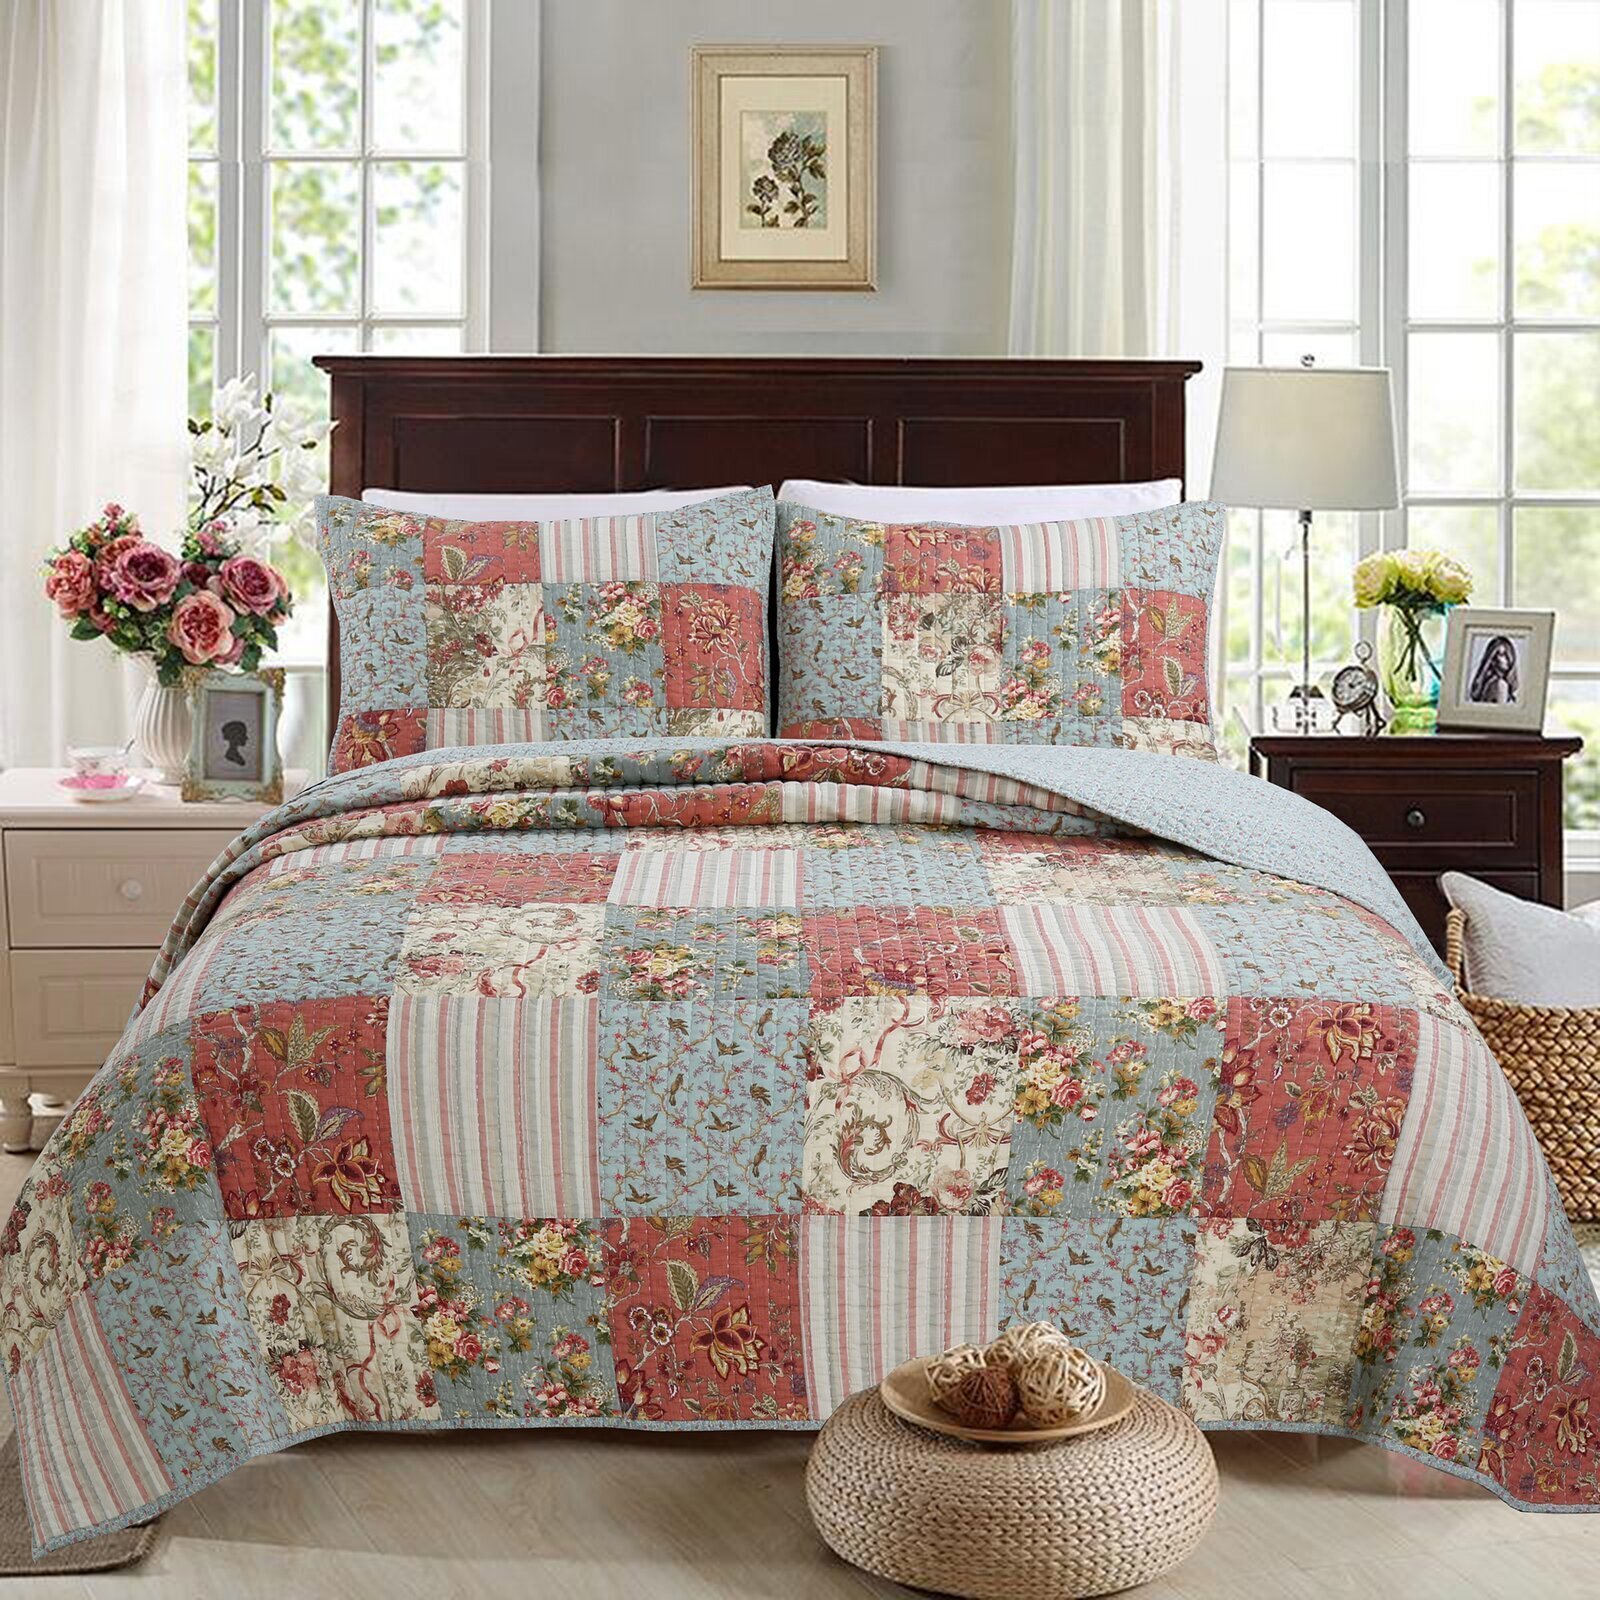 Old Fashioned Coral and Teal Bedding Quilt Set